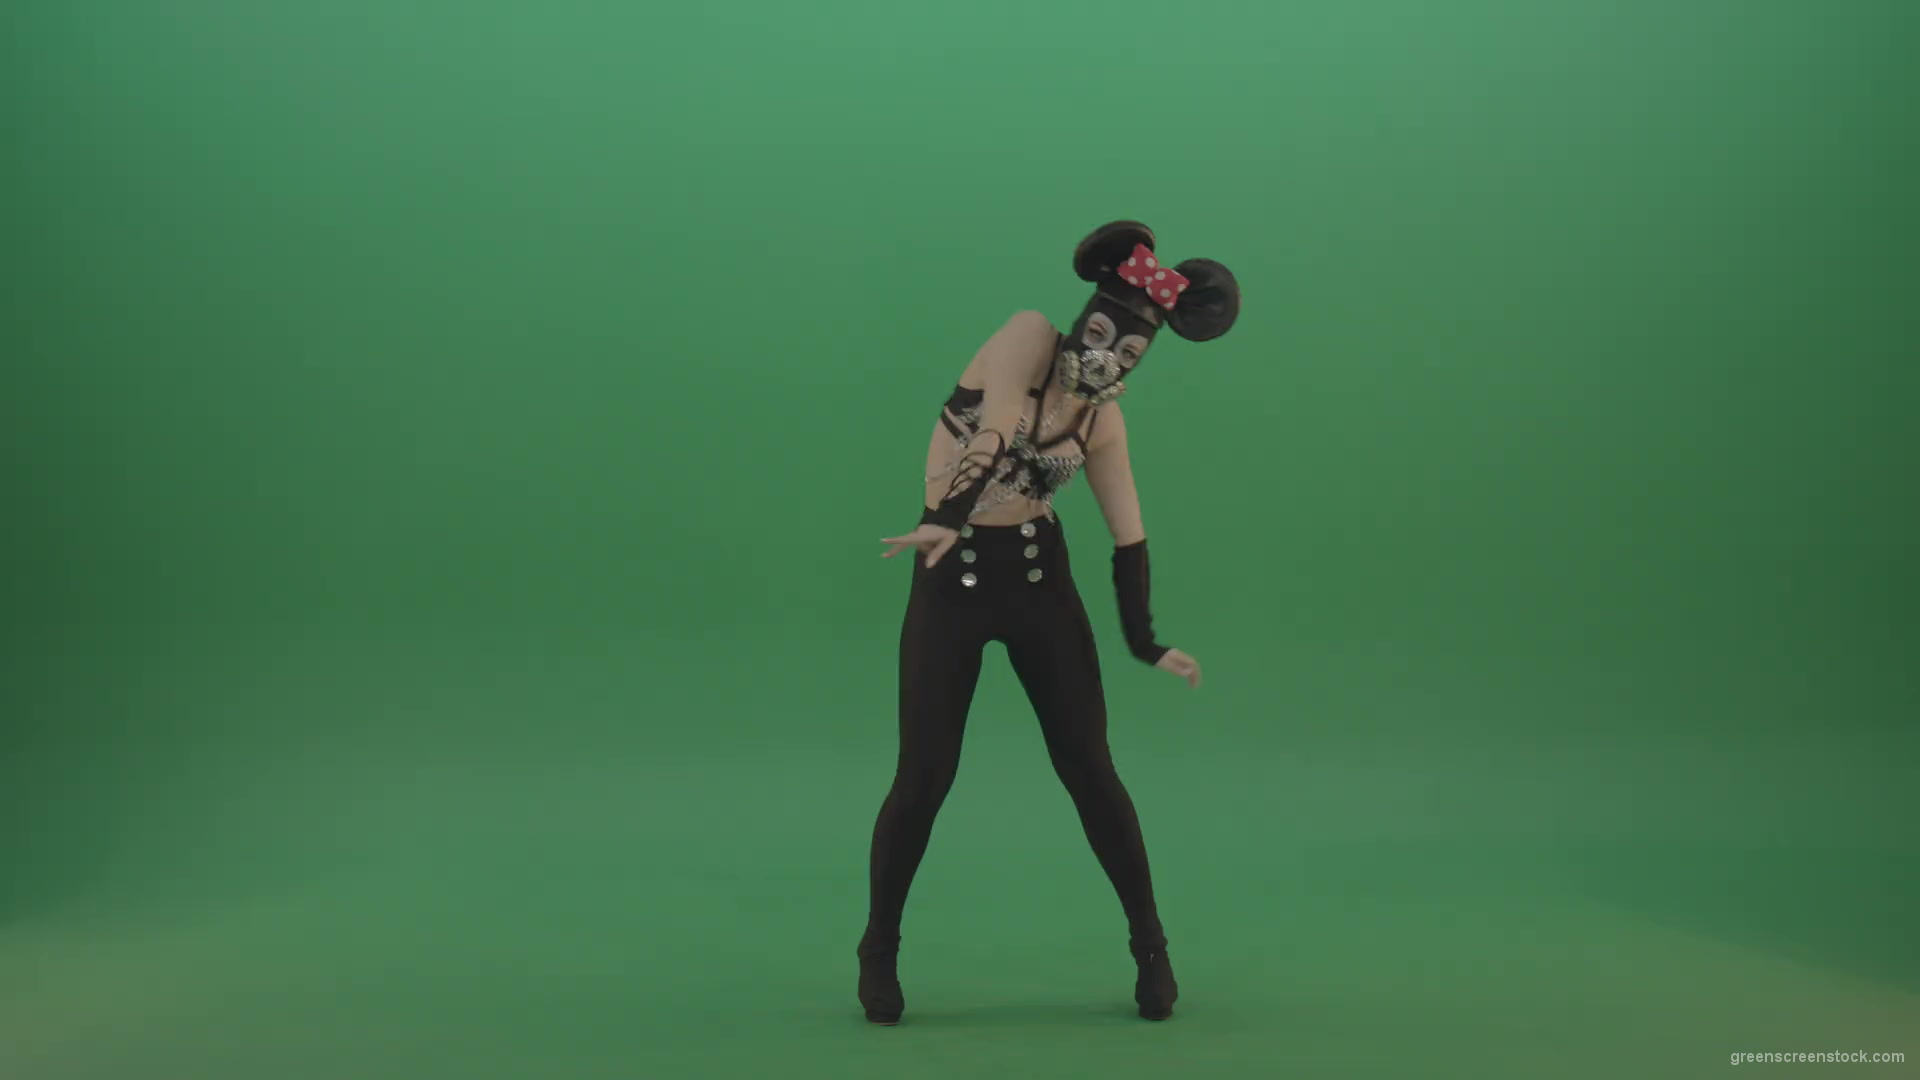 Girl-quickly-dances-in-the-style-of-Mickey-Mouse-on-the-sides-of-a-sexy-costume-on-green-screen-1920_001 Green Screen Stock